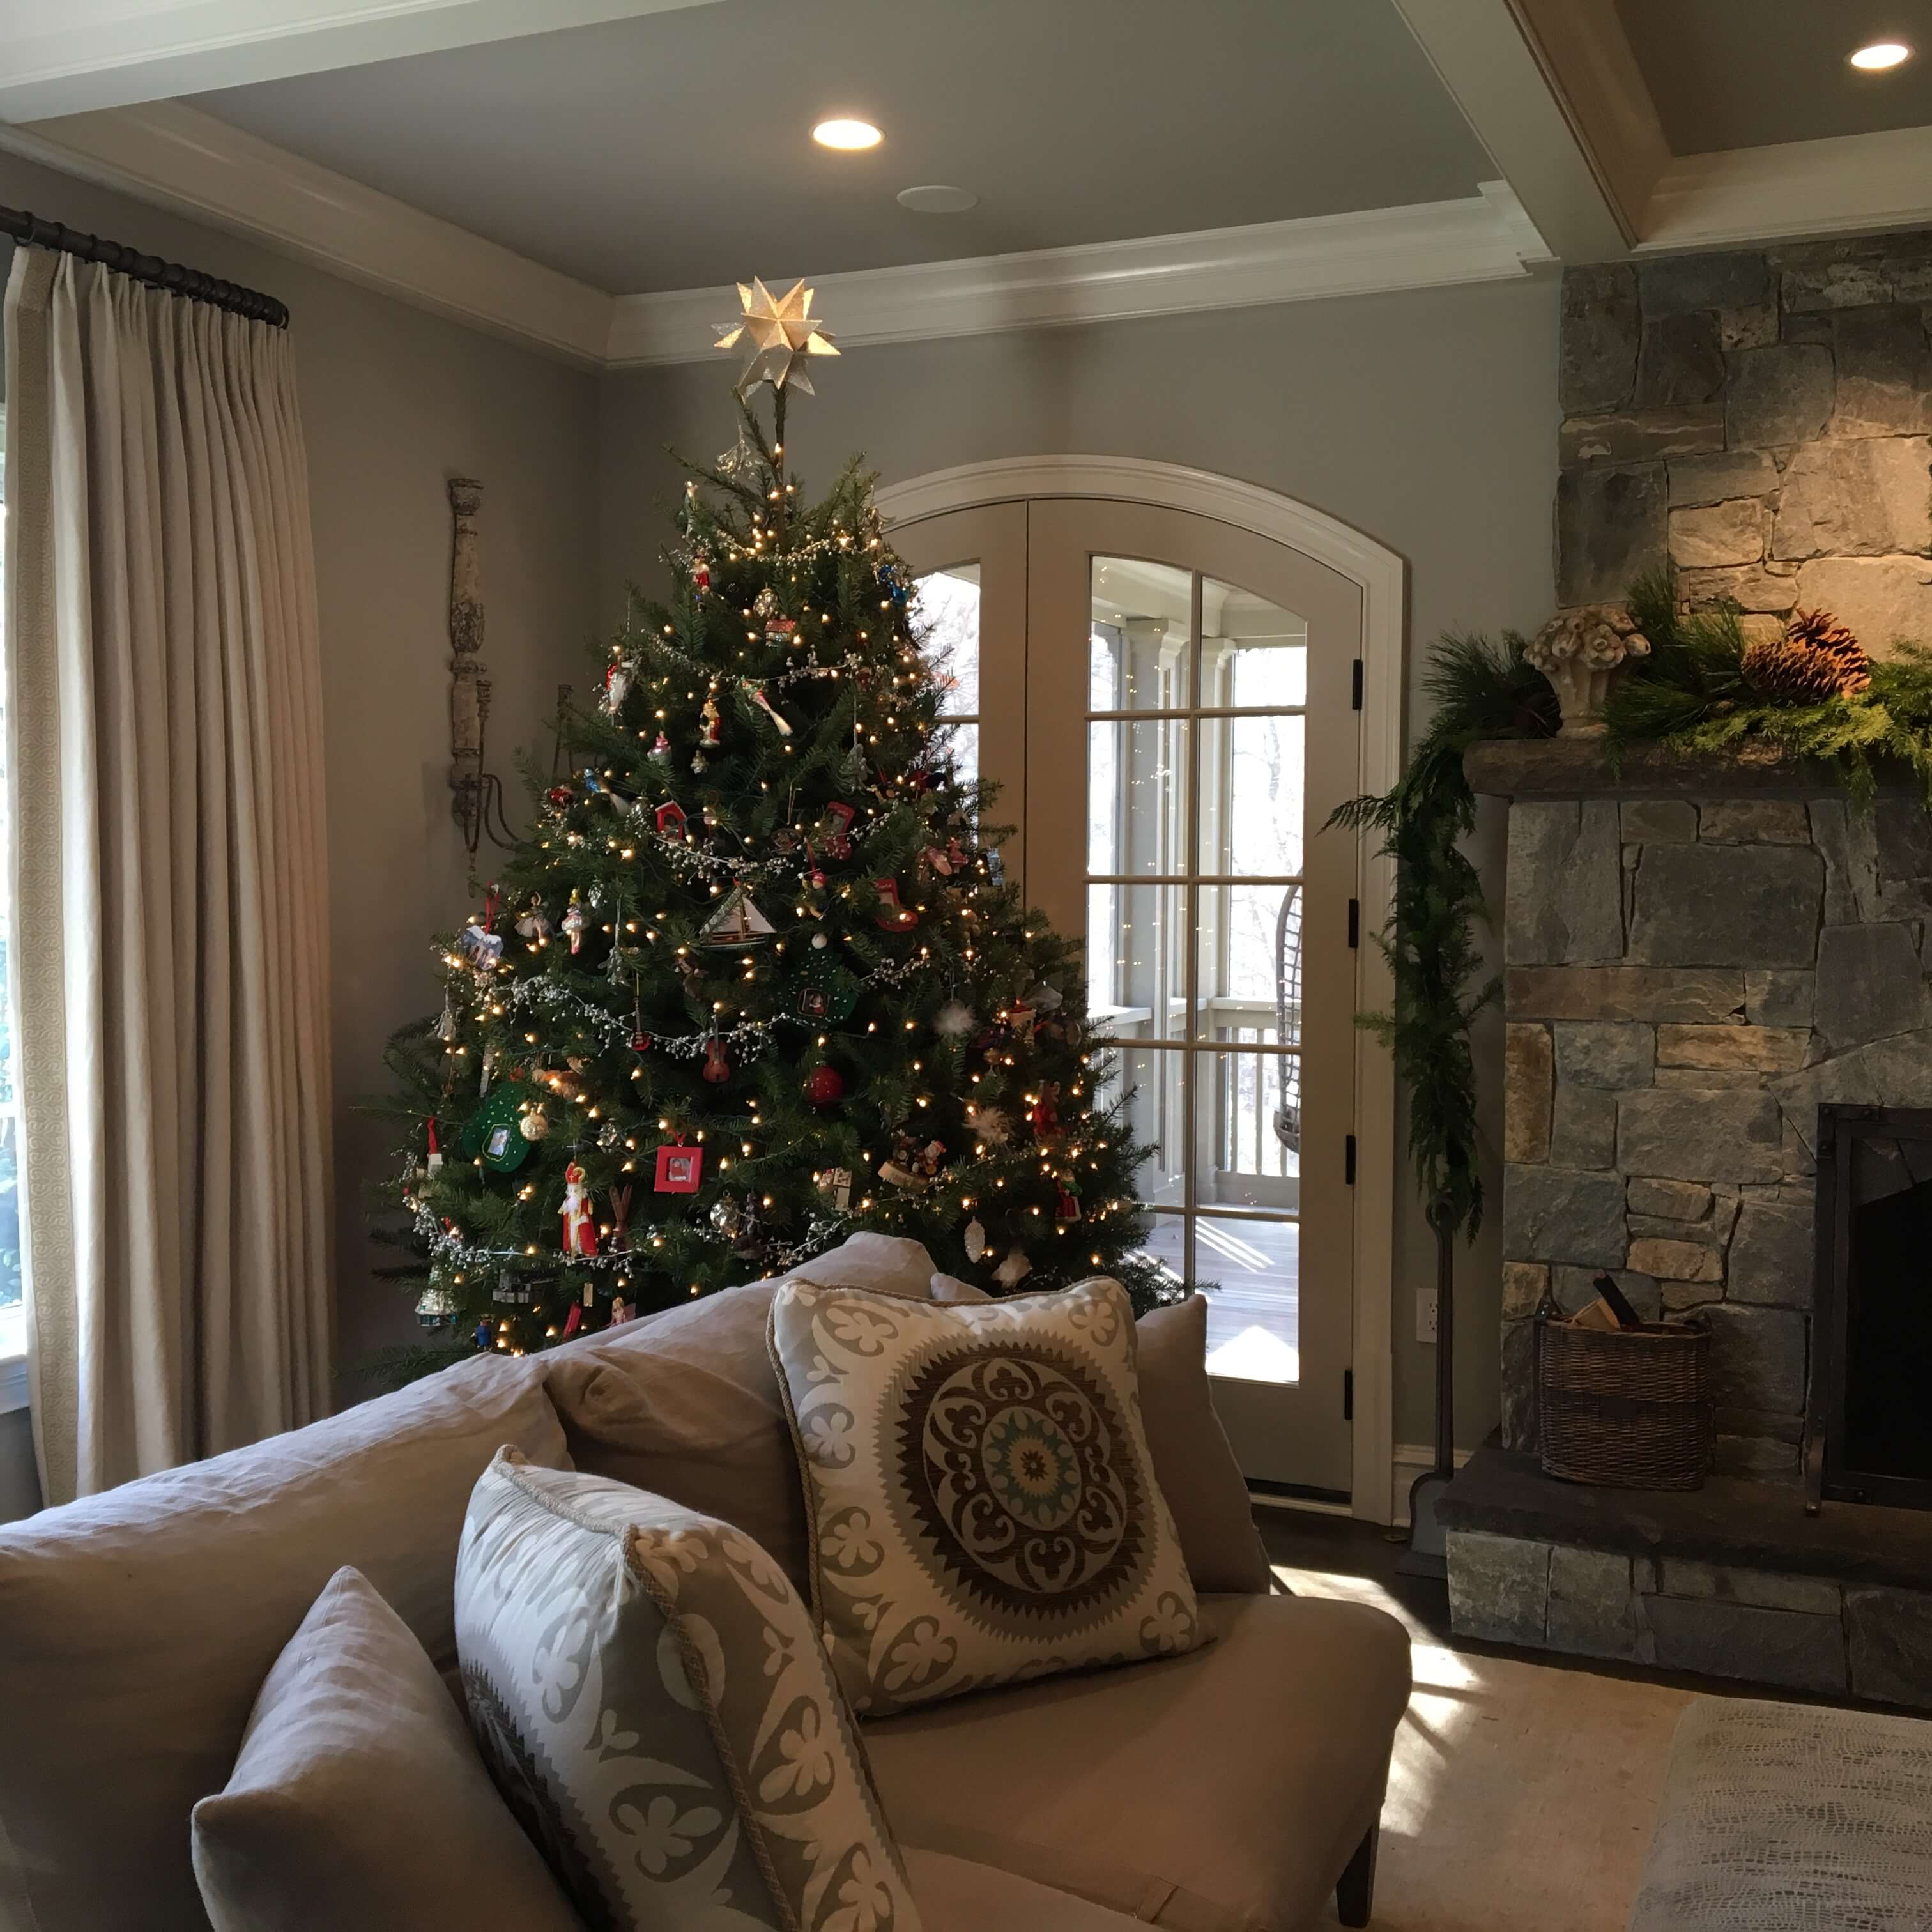 Decorating with Fresh Greens on Mantle and Tree